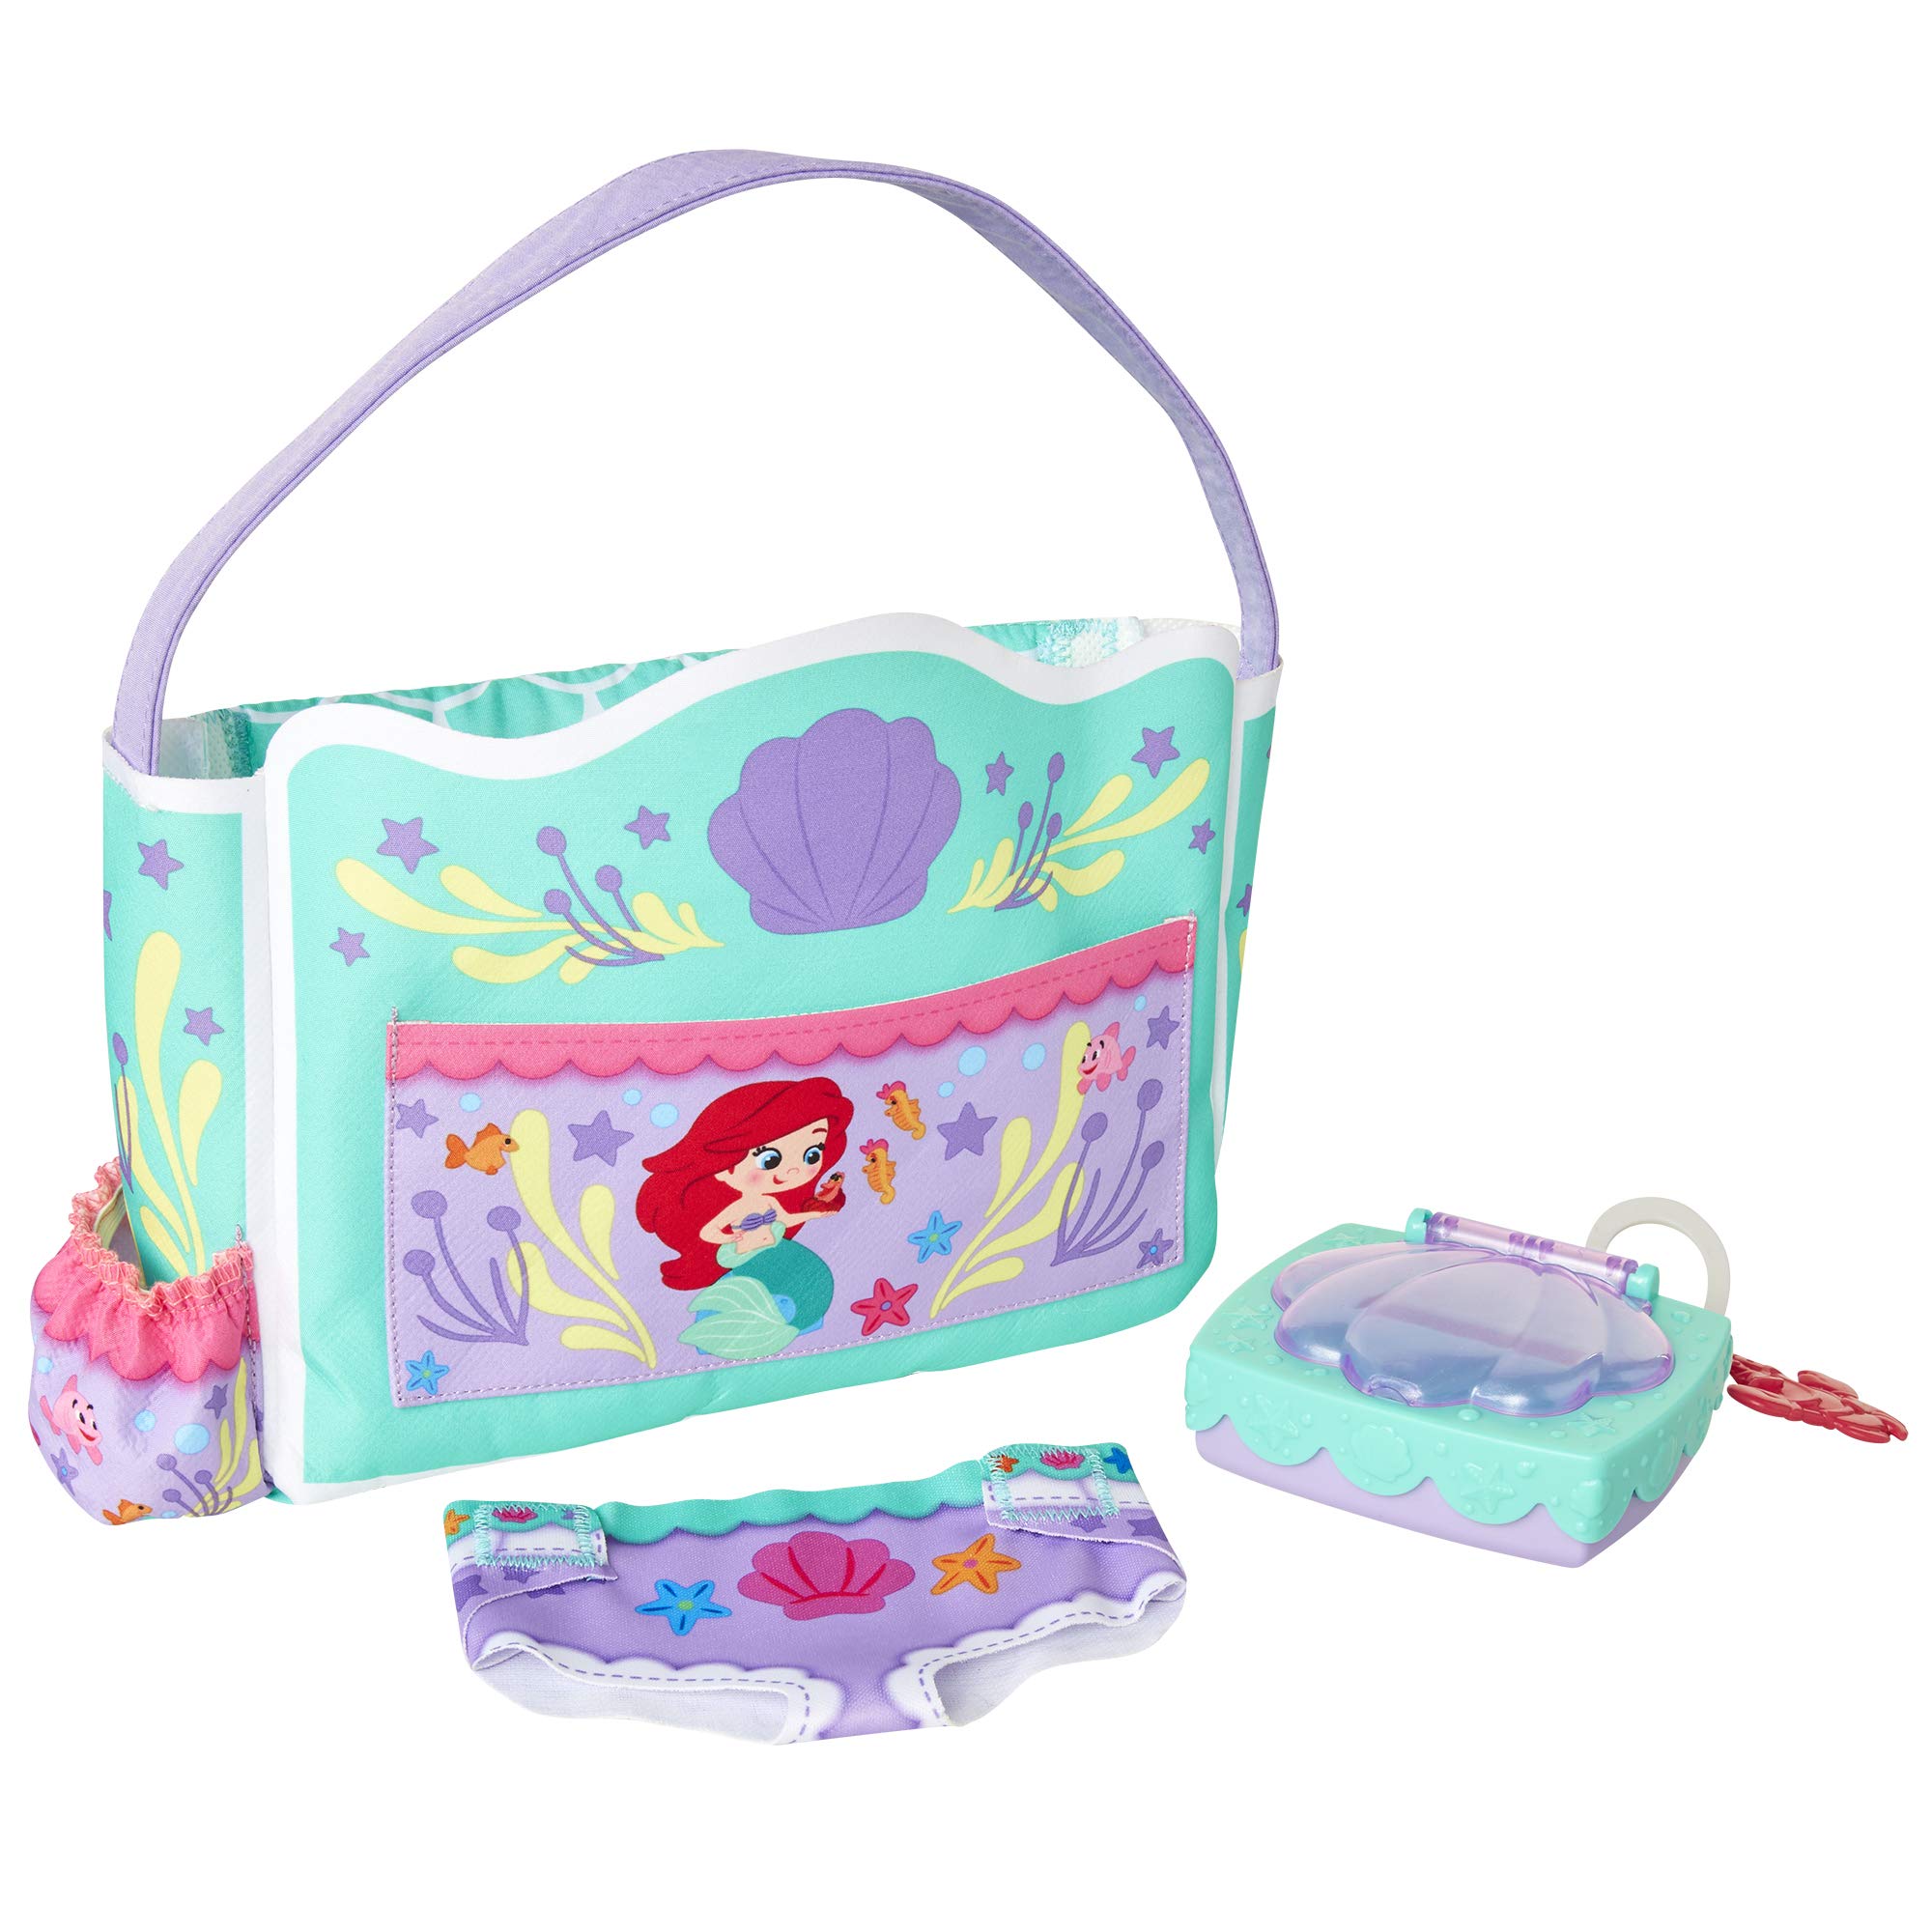 My Disney Nursery Baby Doll Accessories, Ariel Transforming 2-in-1 Diaper Bag & Changing Pad for Dolls Inspired by Disney The Little Mermaid! Pretend Wipes Toy Container, Diaper Clip with Charm